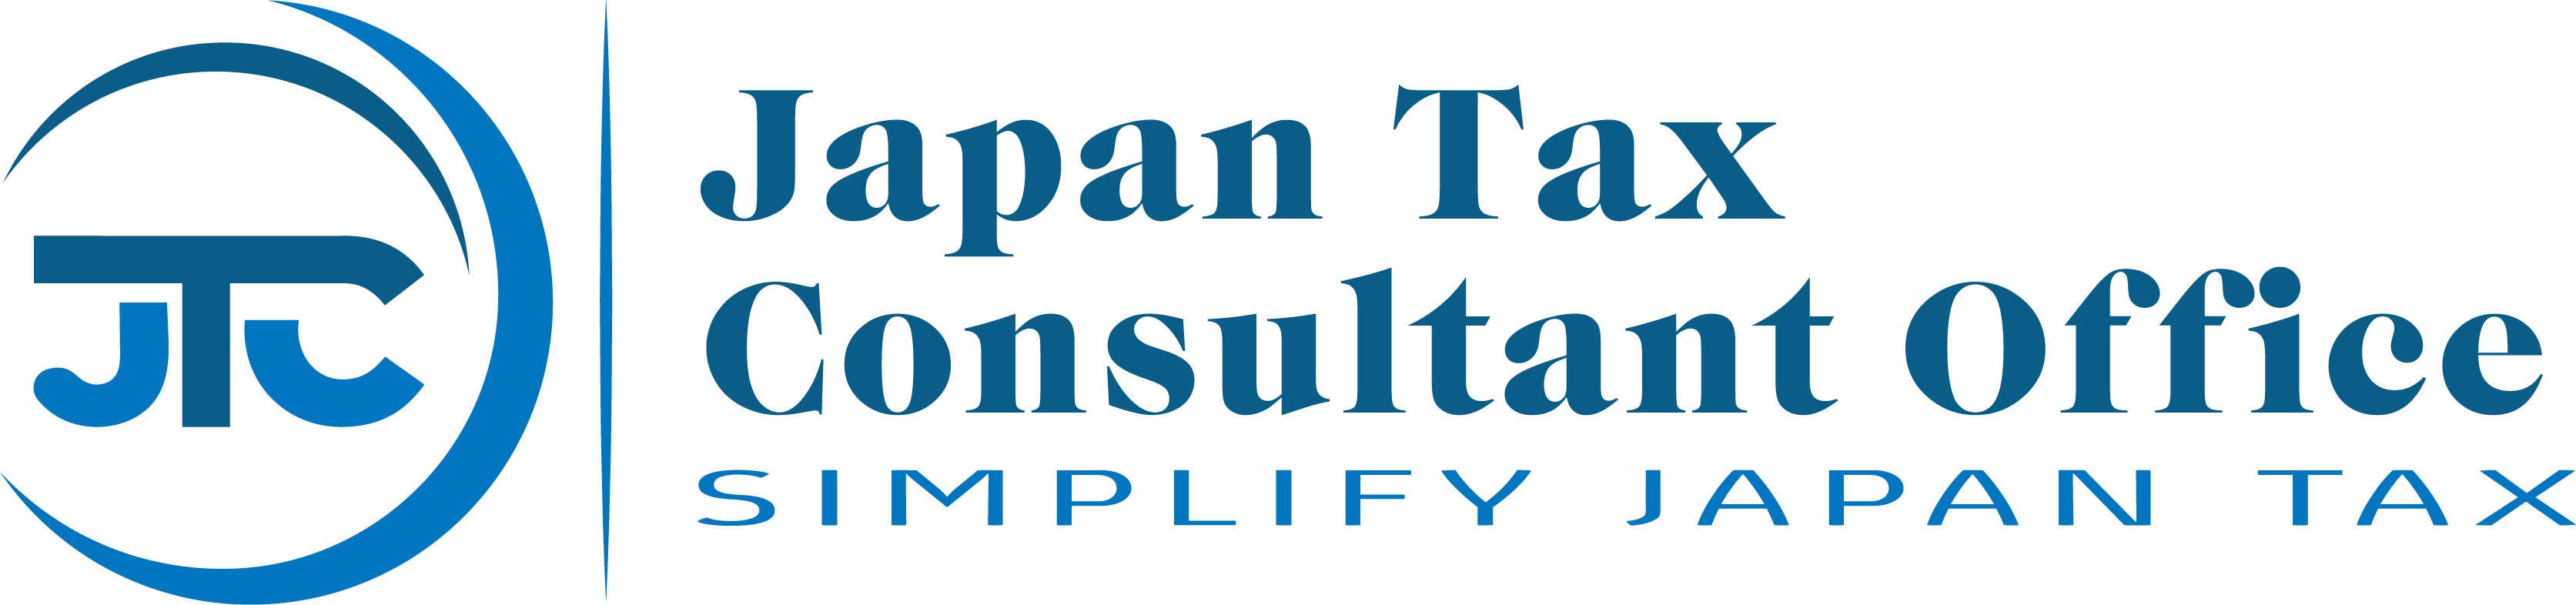 Japan Tax Consultant Office: Aki Tax Expert Services in English